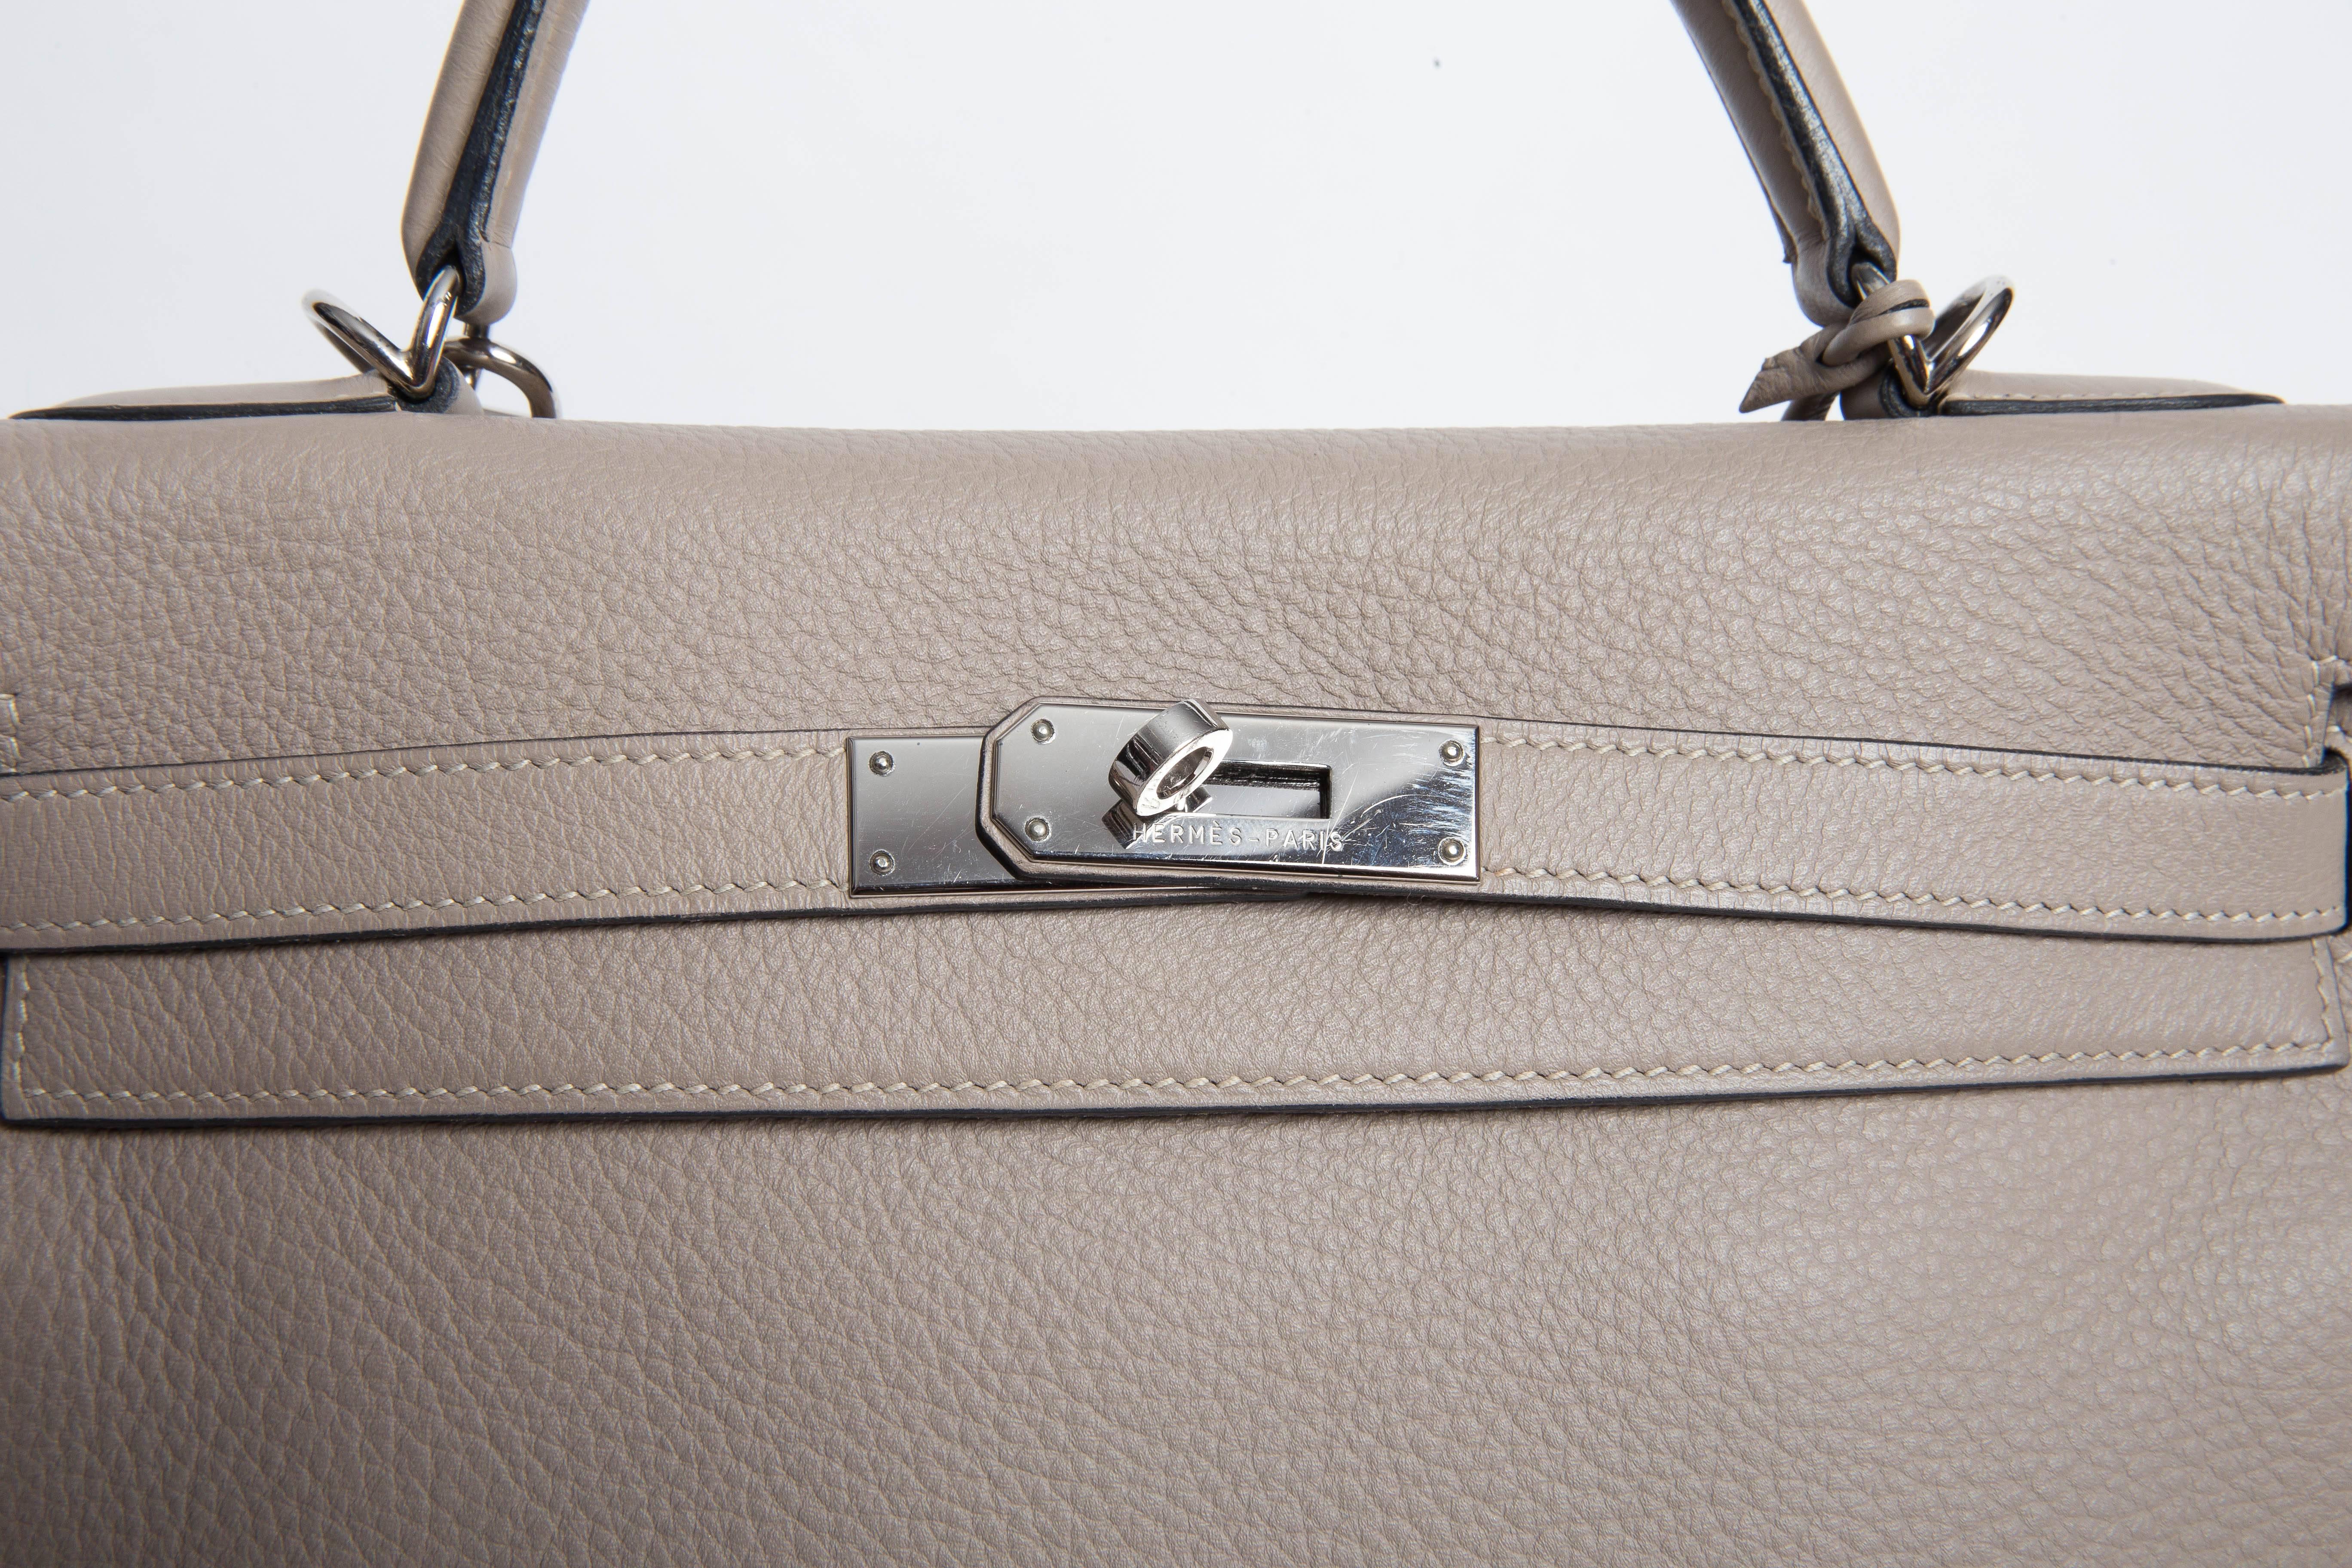 Hermes Etoupe Clemence Leather Palladium Hardware Kelly Bag In Excellent Condition For Sale In Westhampton Beach, NY